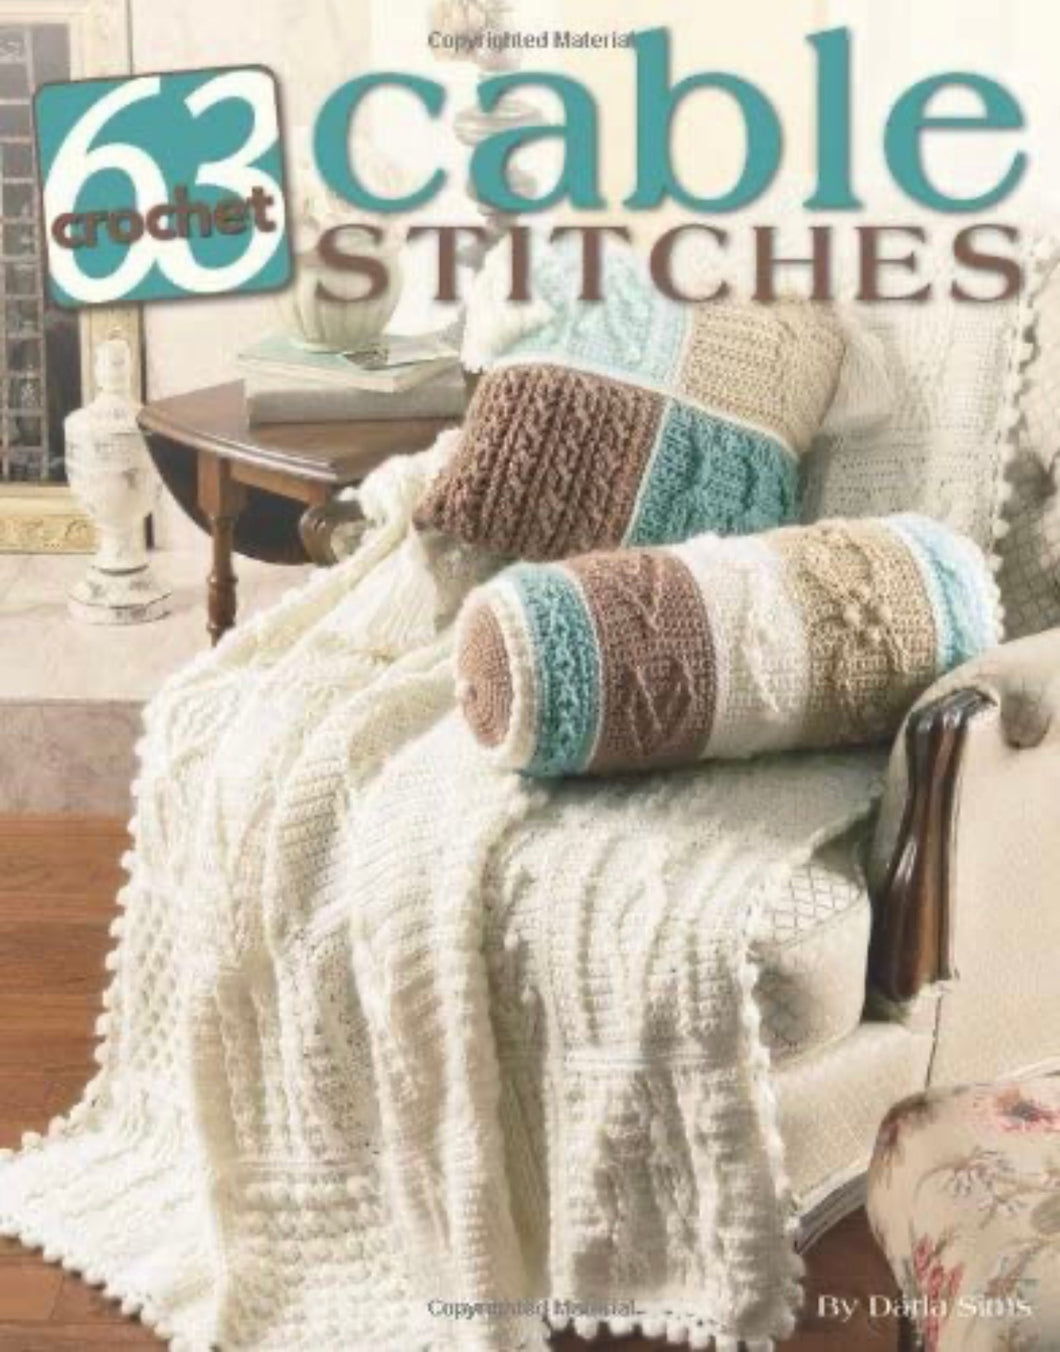 CROCHET BOOK:  63 Cable Stitches to Crochet (Leisure Arts #3961) by Darla Sims